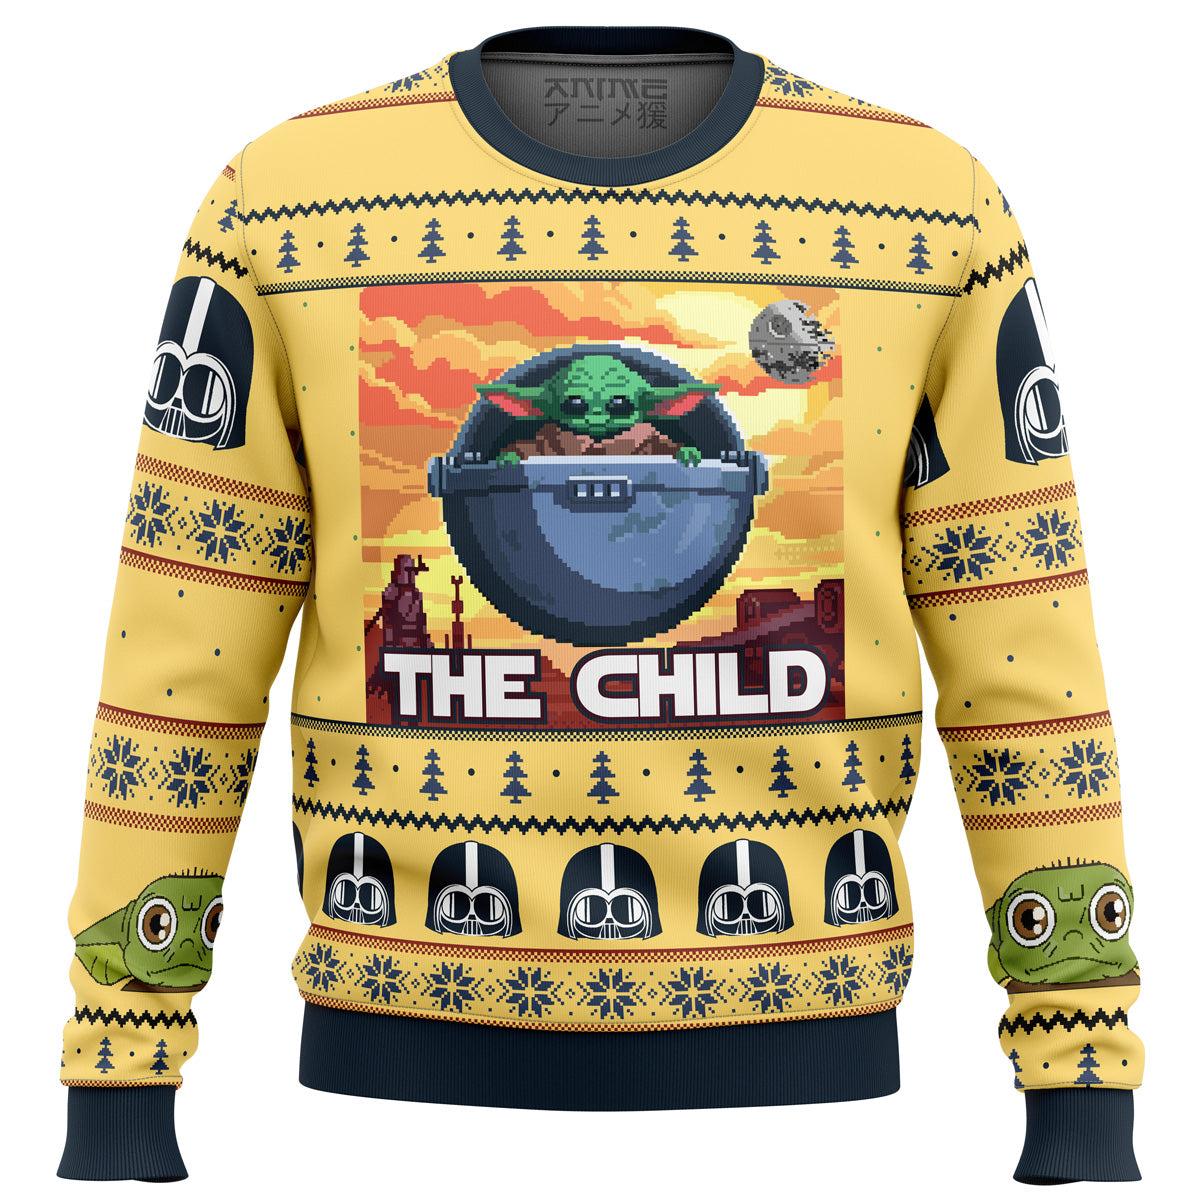 Baby Yoda the Child Mandalorion Star Wars Ugly Sweater